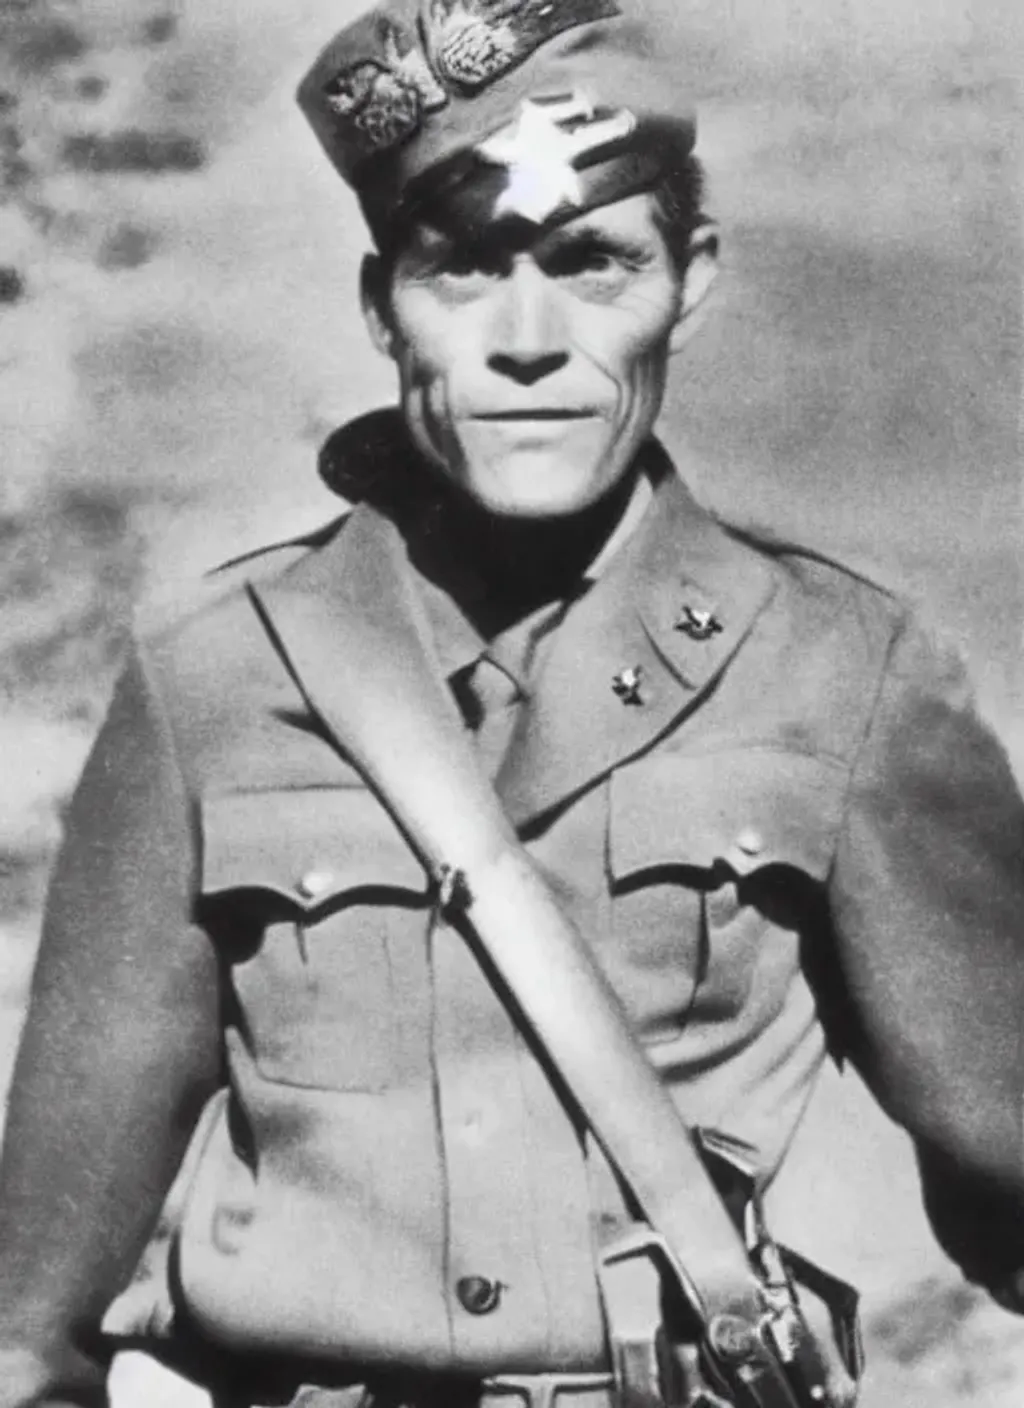 Prompt: Photograph of Willem Dafoe as a soldier in World War II, black and white